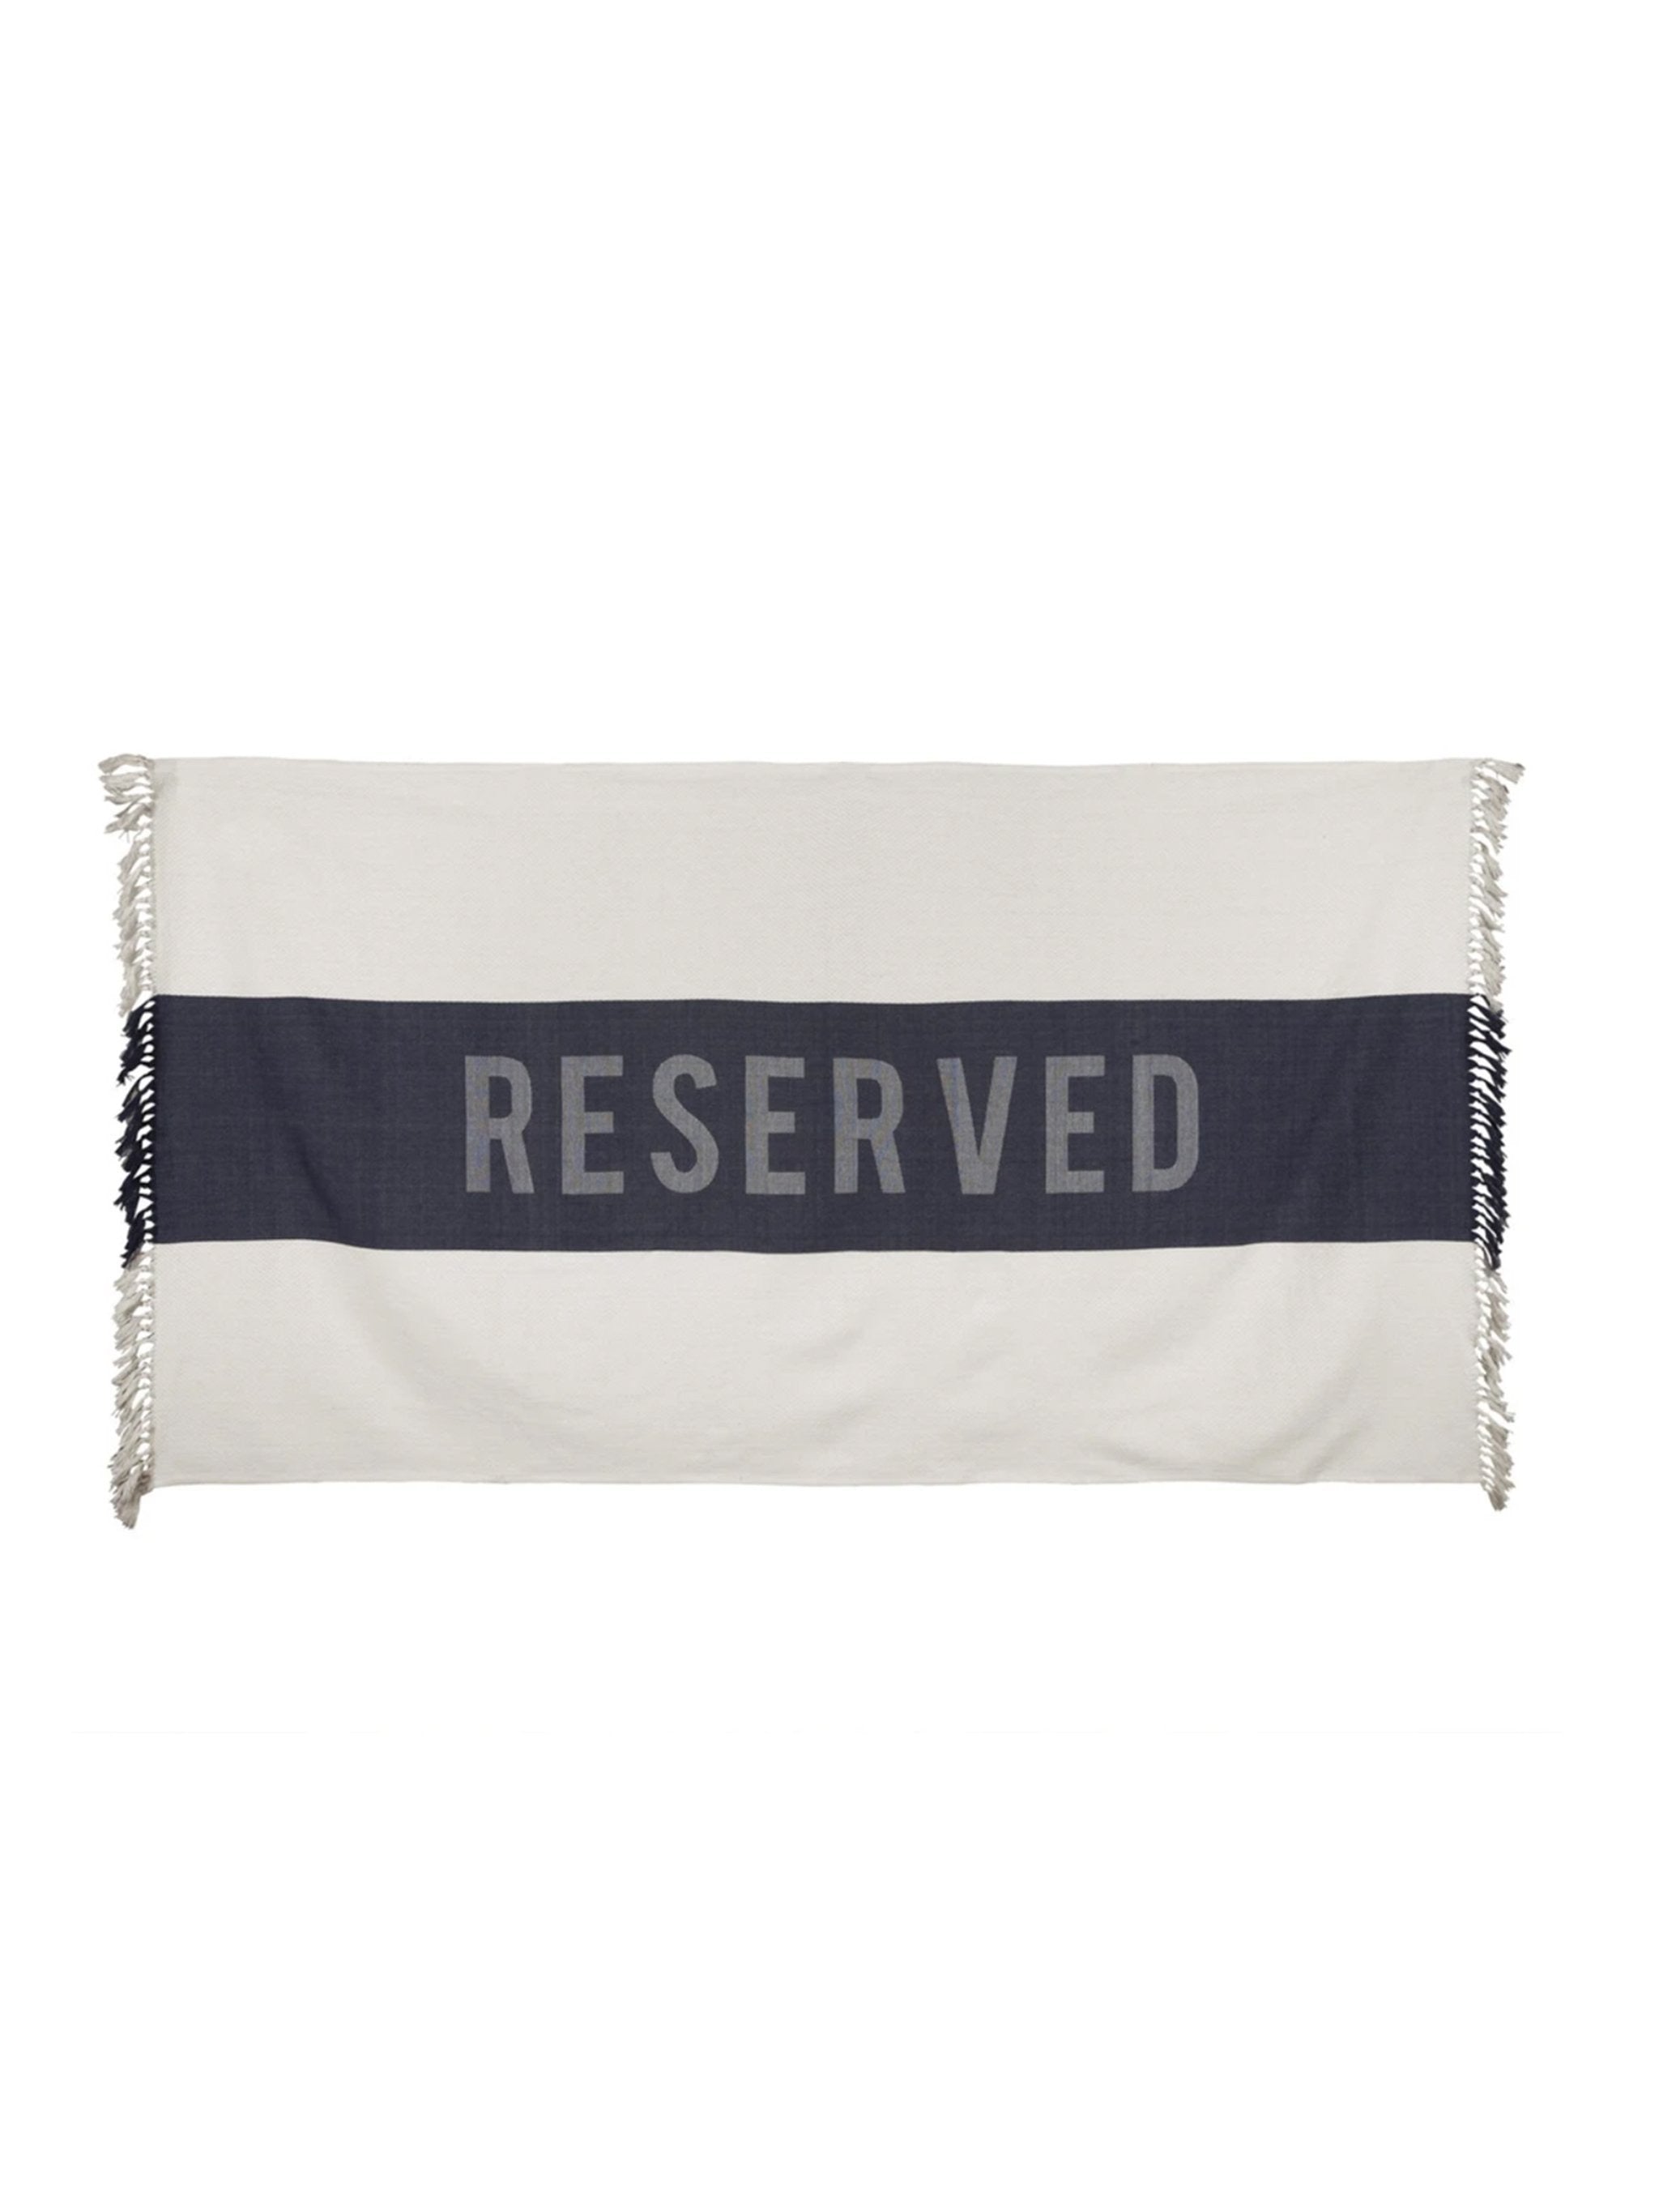 Reserved Beach Towels